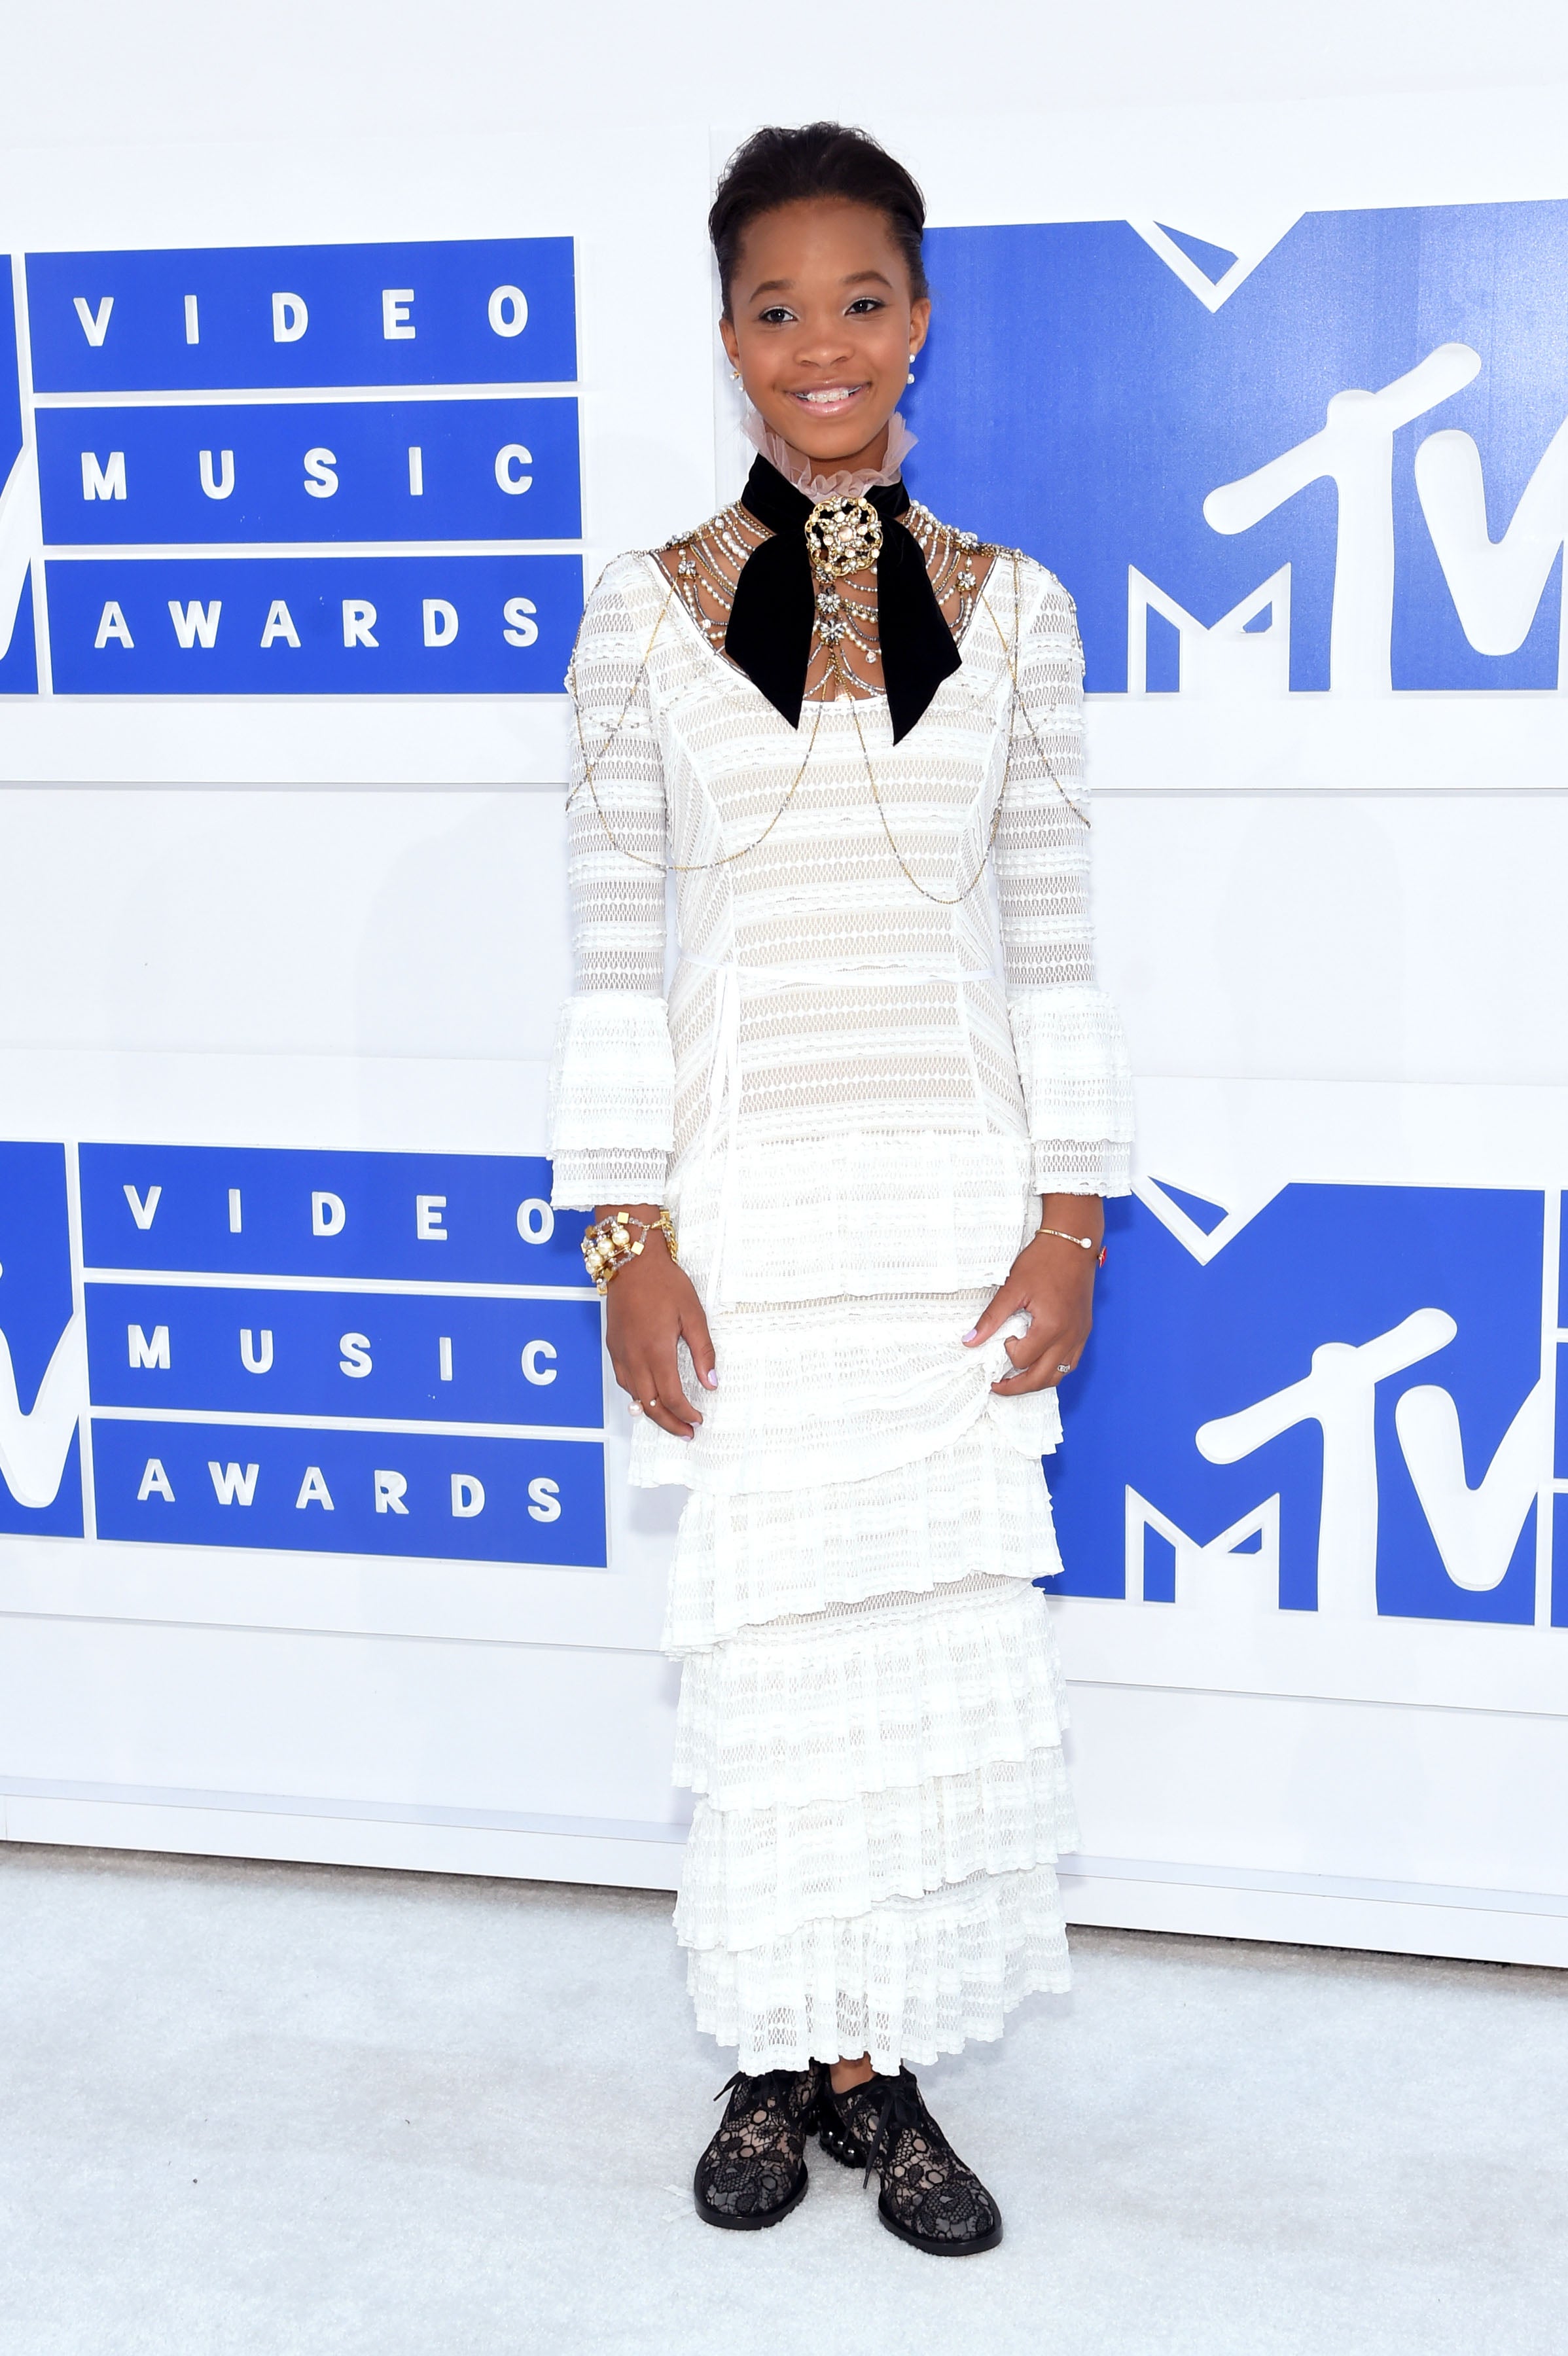 The 2016 VMAs Red Carpet Was Epic and We've Got the Receipts
